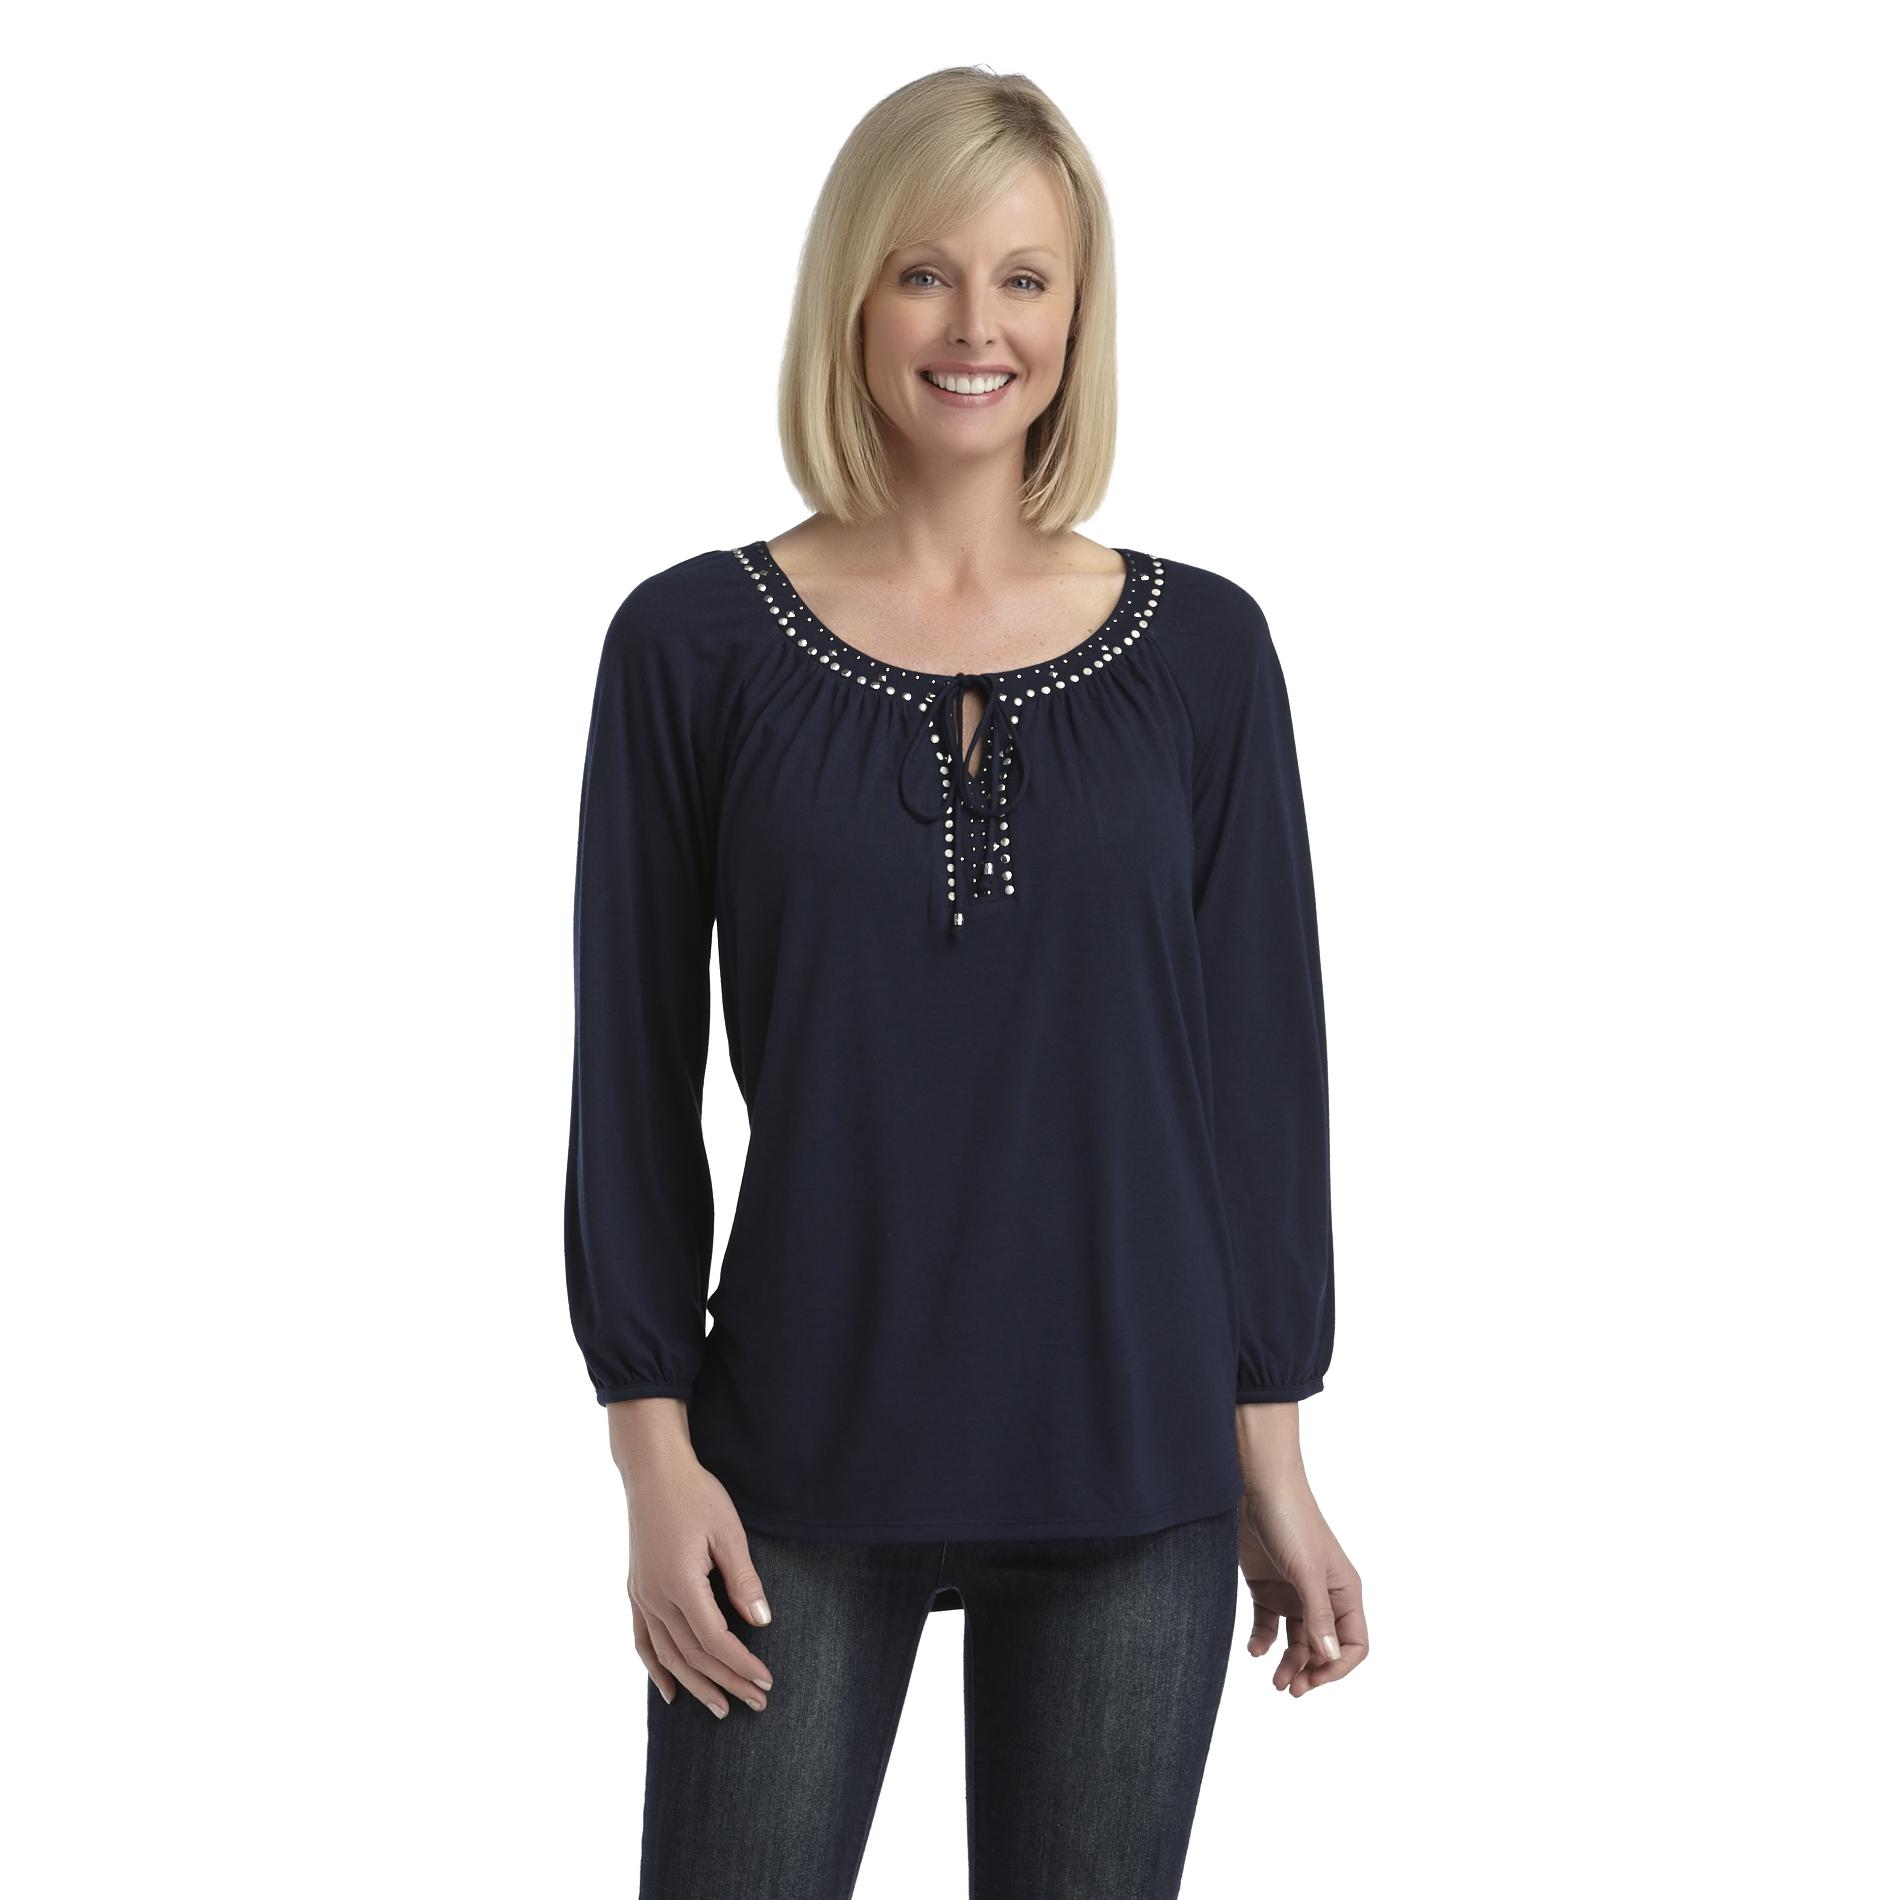 Jaclyn Smith Women's Embellished Peasant Top - Studded